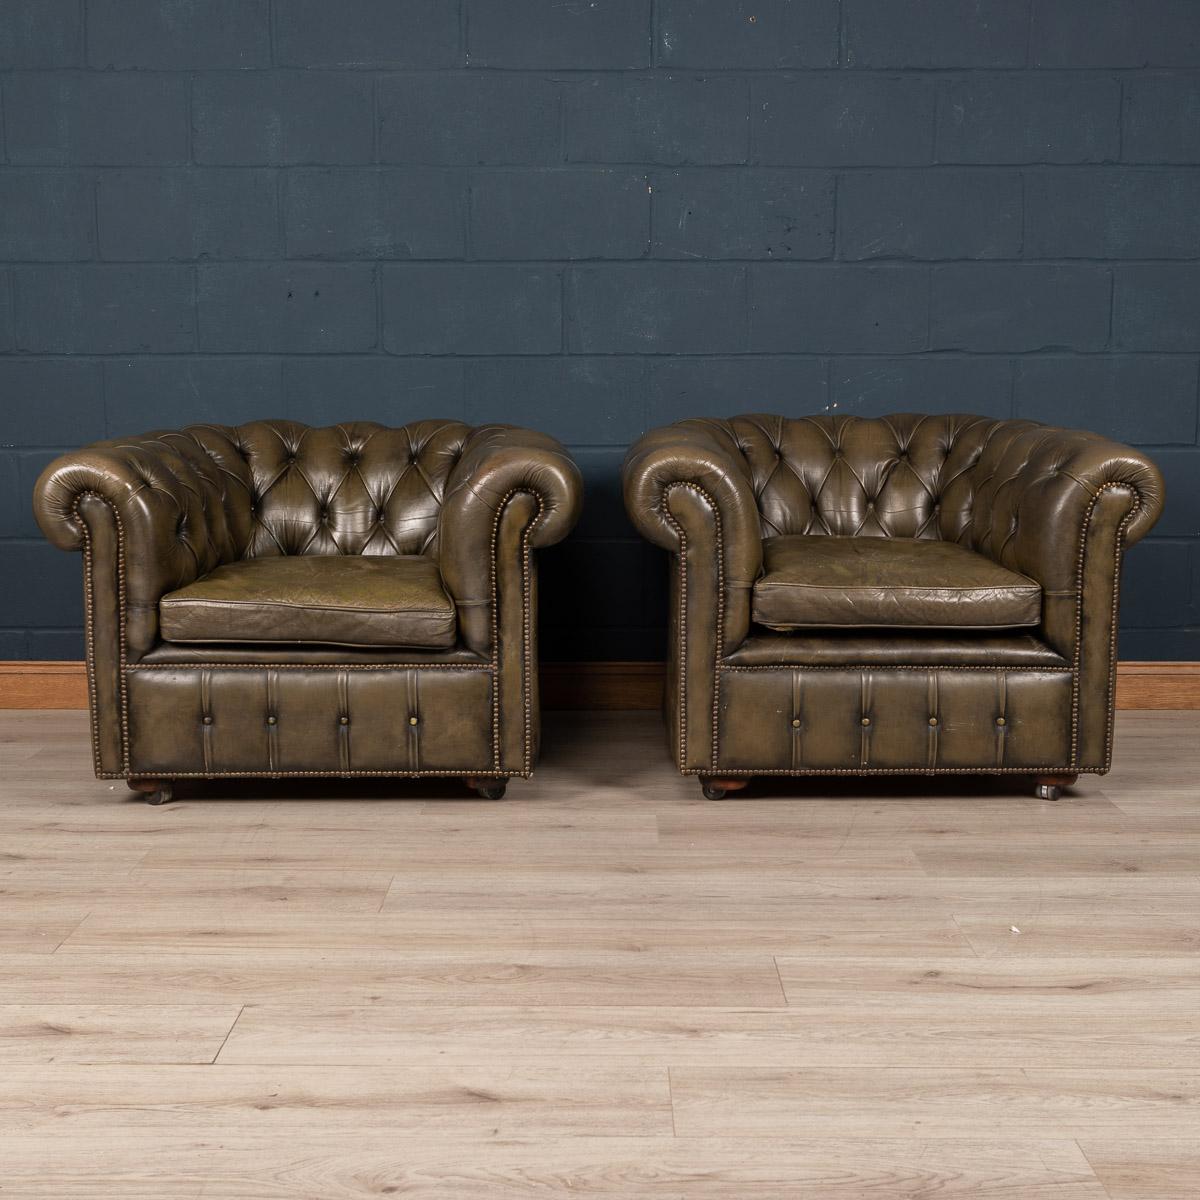 Superb mid 20th century green leather chesterfield sofa. One of the most elegant models with button down seating, this is a fashionable item of furniture capable of uplifting the interior space of any contemporary or traditional home, the classic